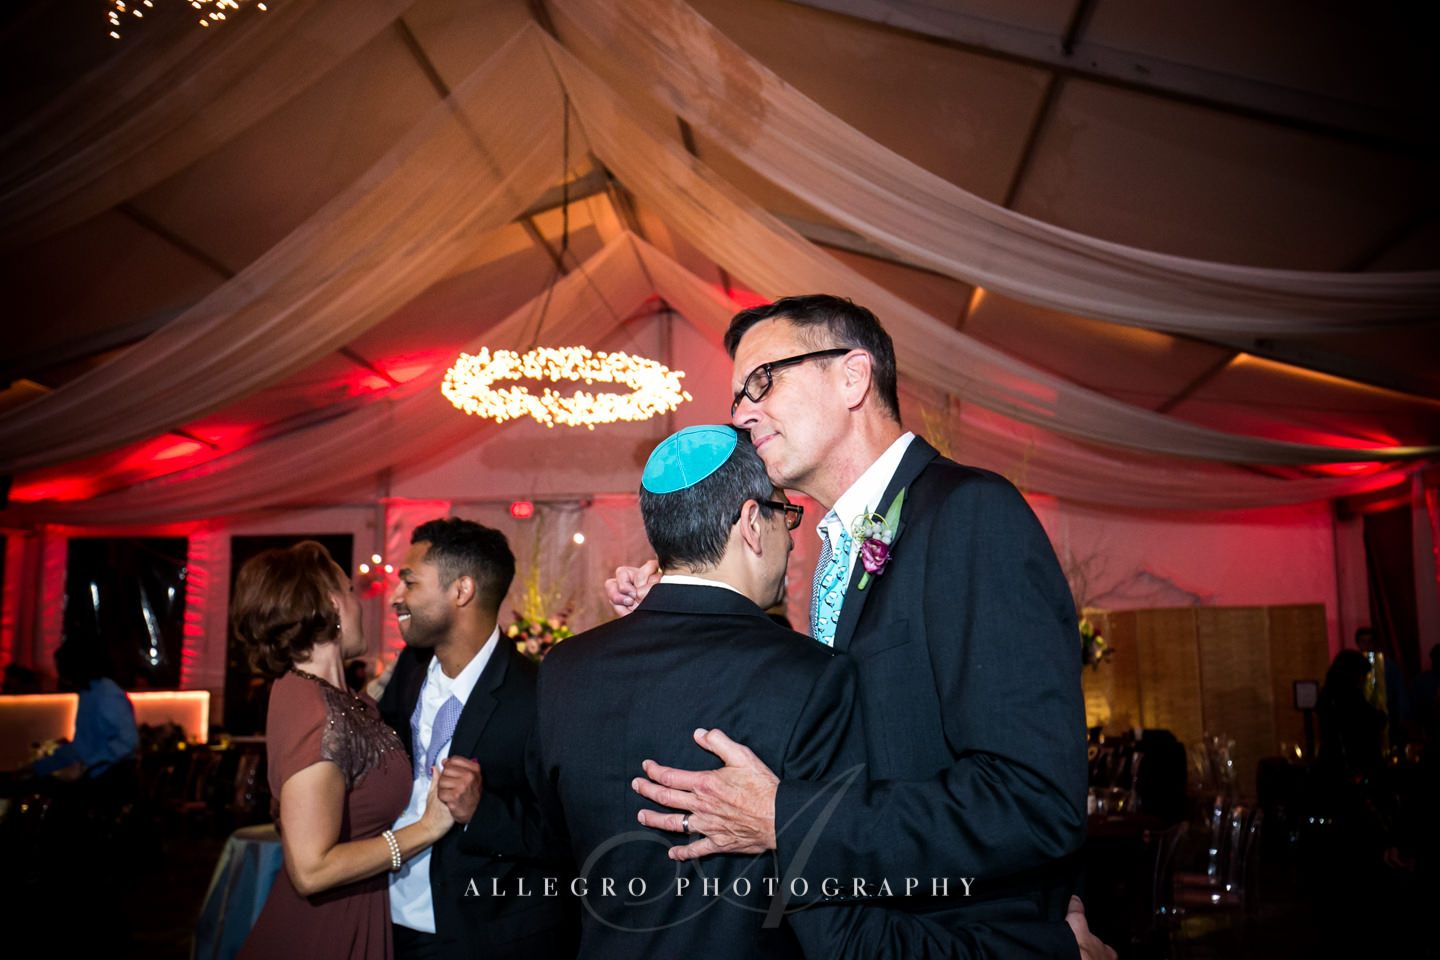 last dance - photo by Allegro Photography